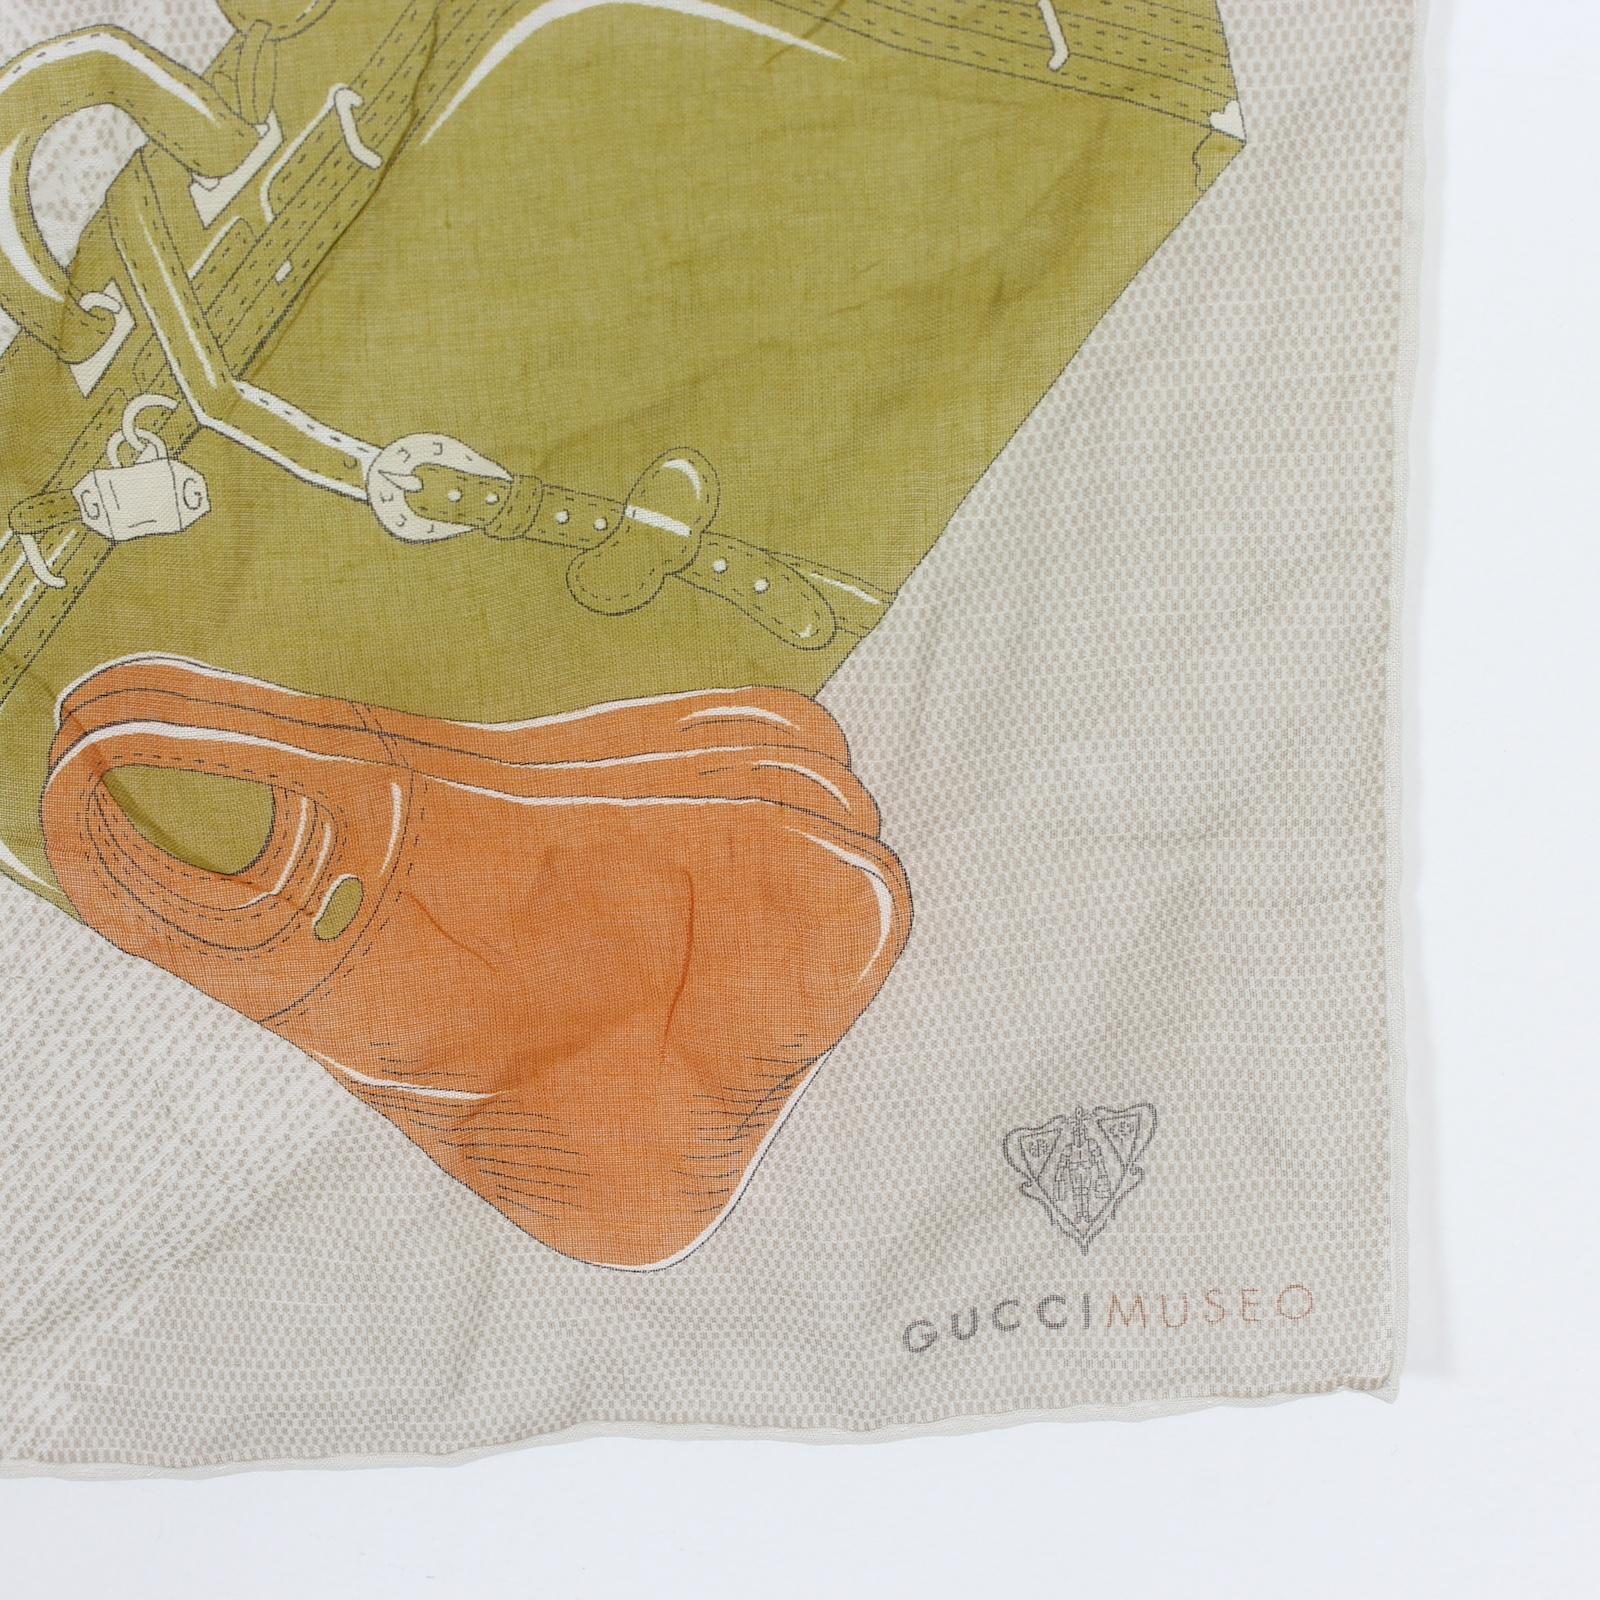 Gucci Museo scarf from the years 2011, this is a limited edition, made on the occasion of the opening of the Gucci Museo. Beige and brown color with typical pattern of the fashion house, 100% cotton fabric. Made in italy.

Measures: 65 x 65 cm